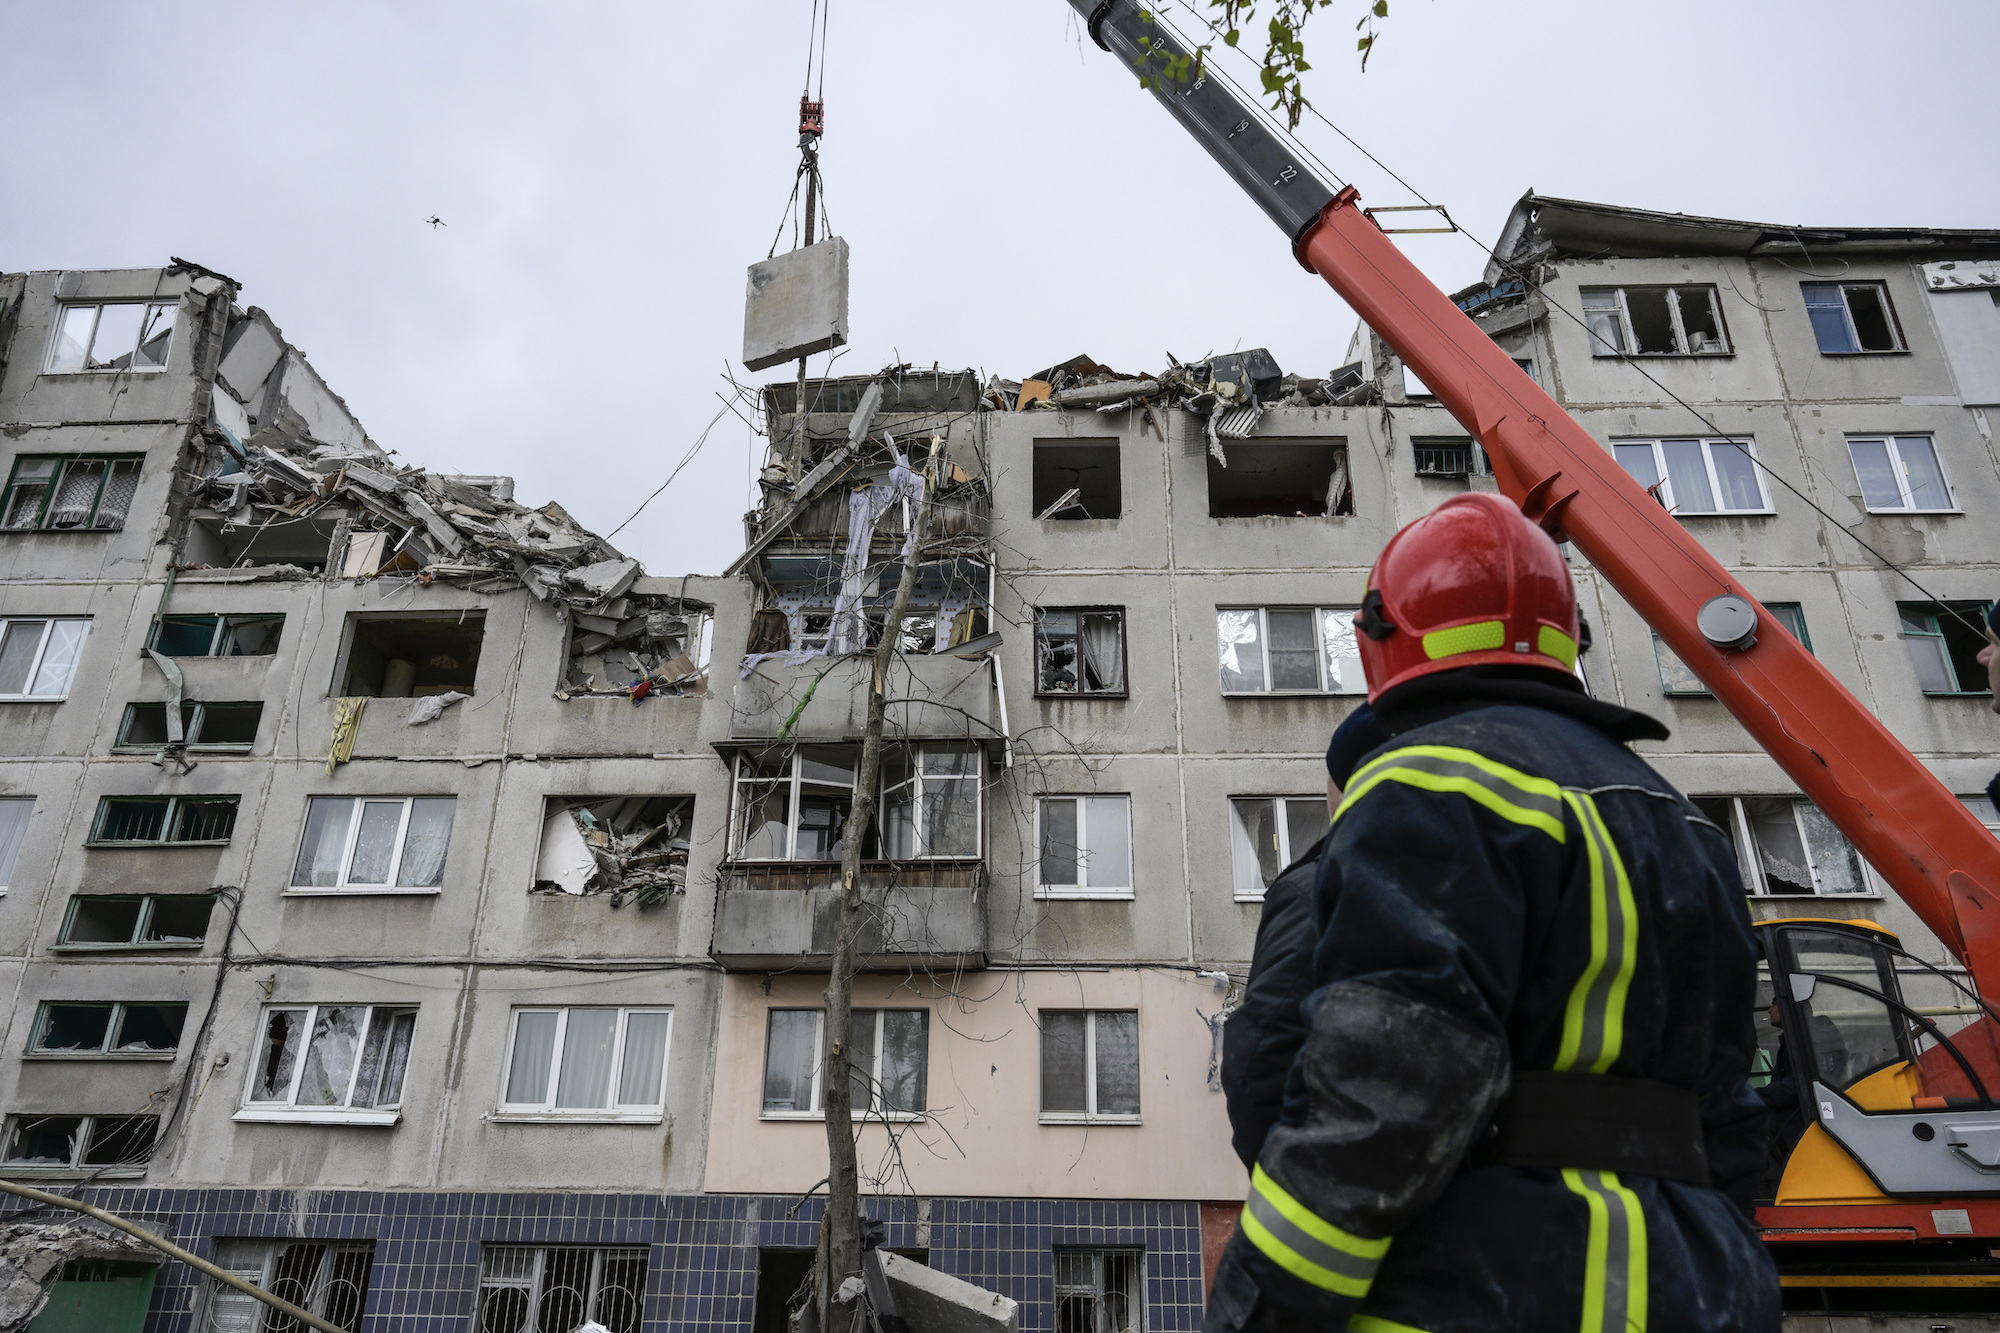 Emergency workers work after a missile strike in Sloviansk on Saturday.